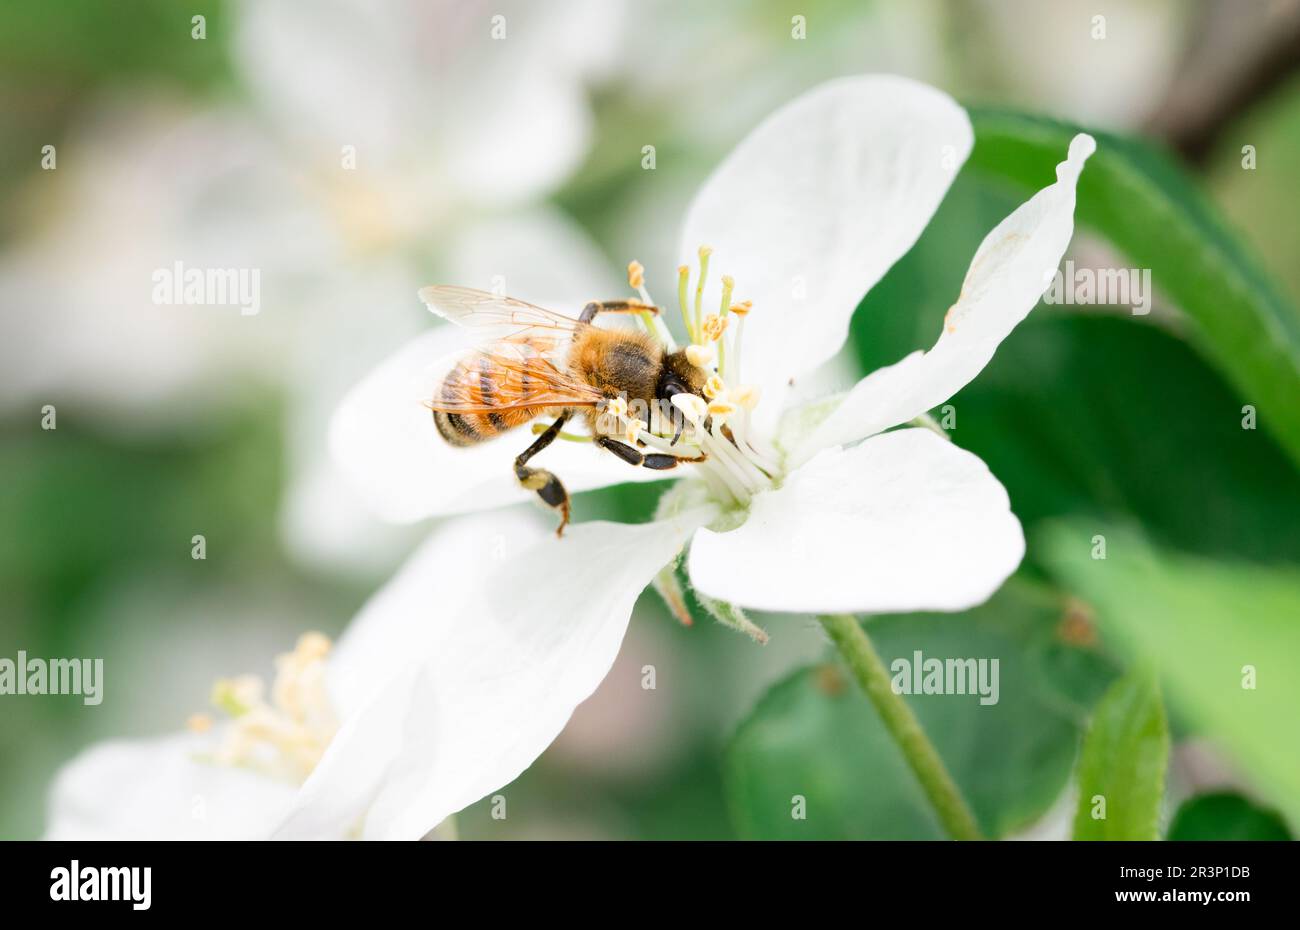 Honey bee foraging on a white apple blossom Stock Photo